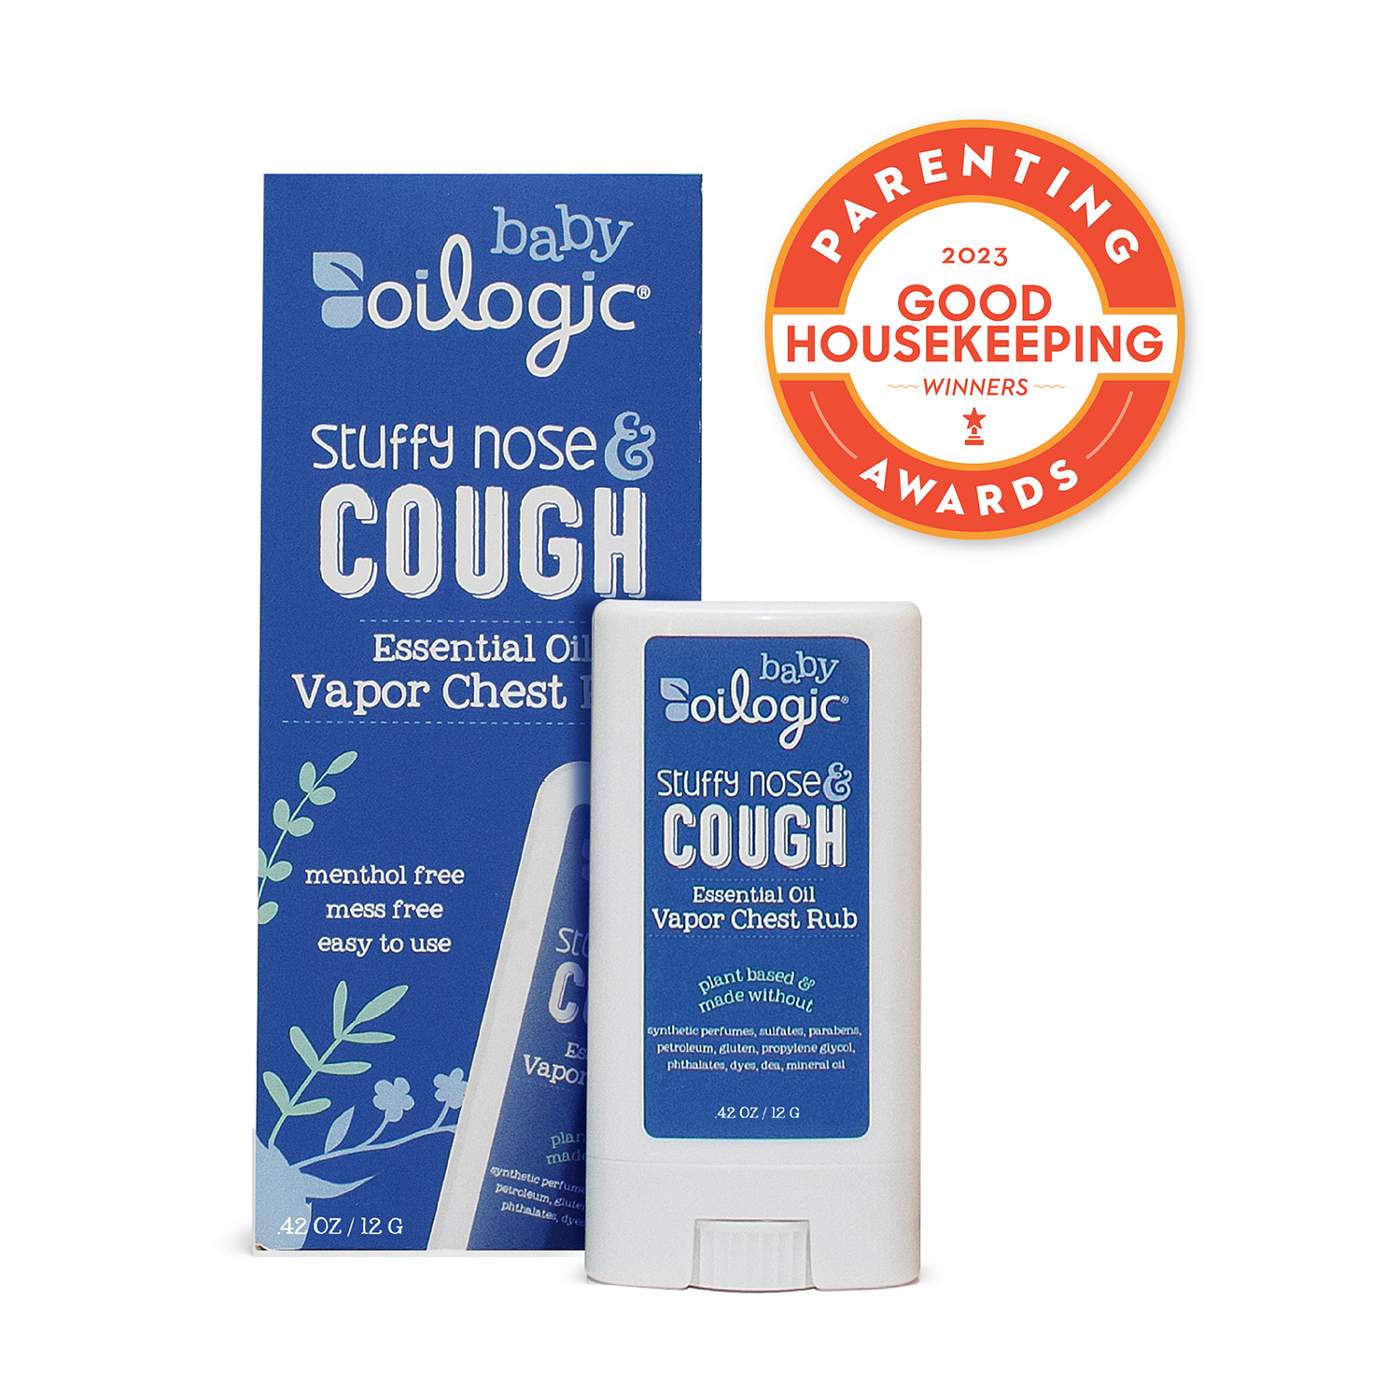 Oilogic Baby Stuffy Nose & Cough Vapor Chest Rub; image 2 of 5